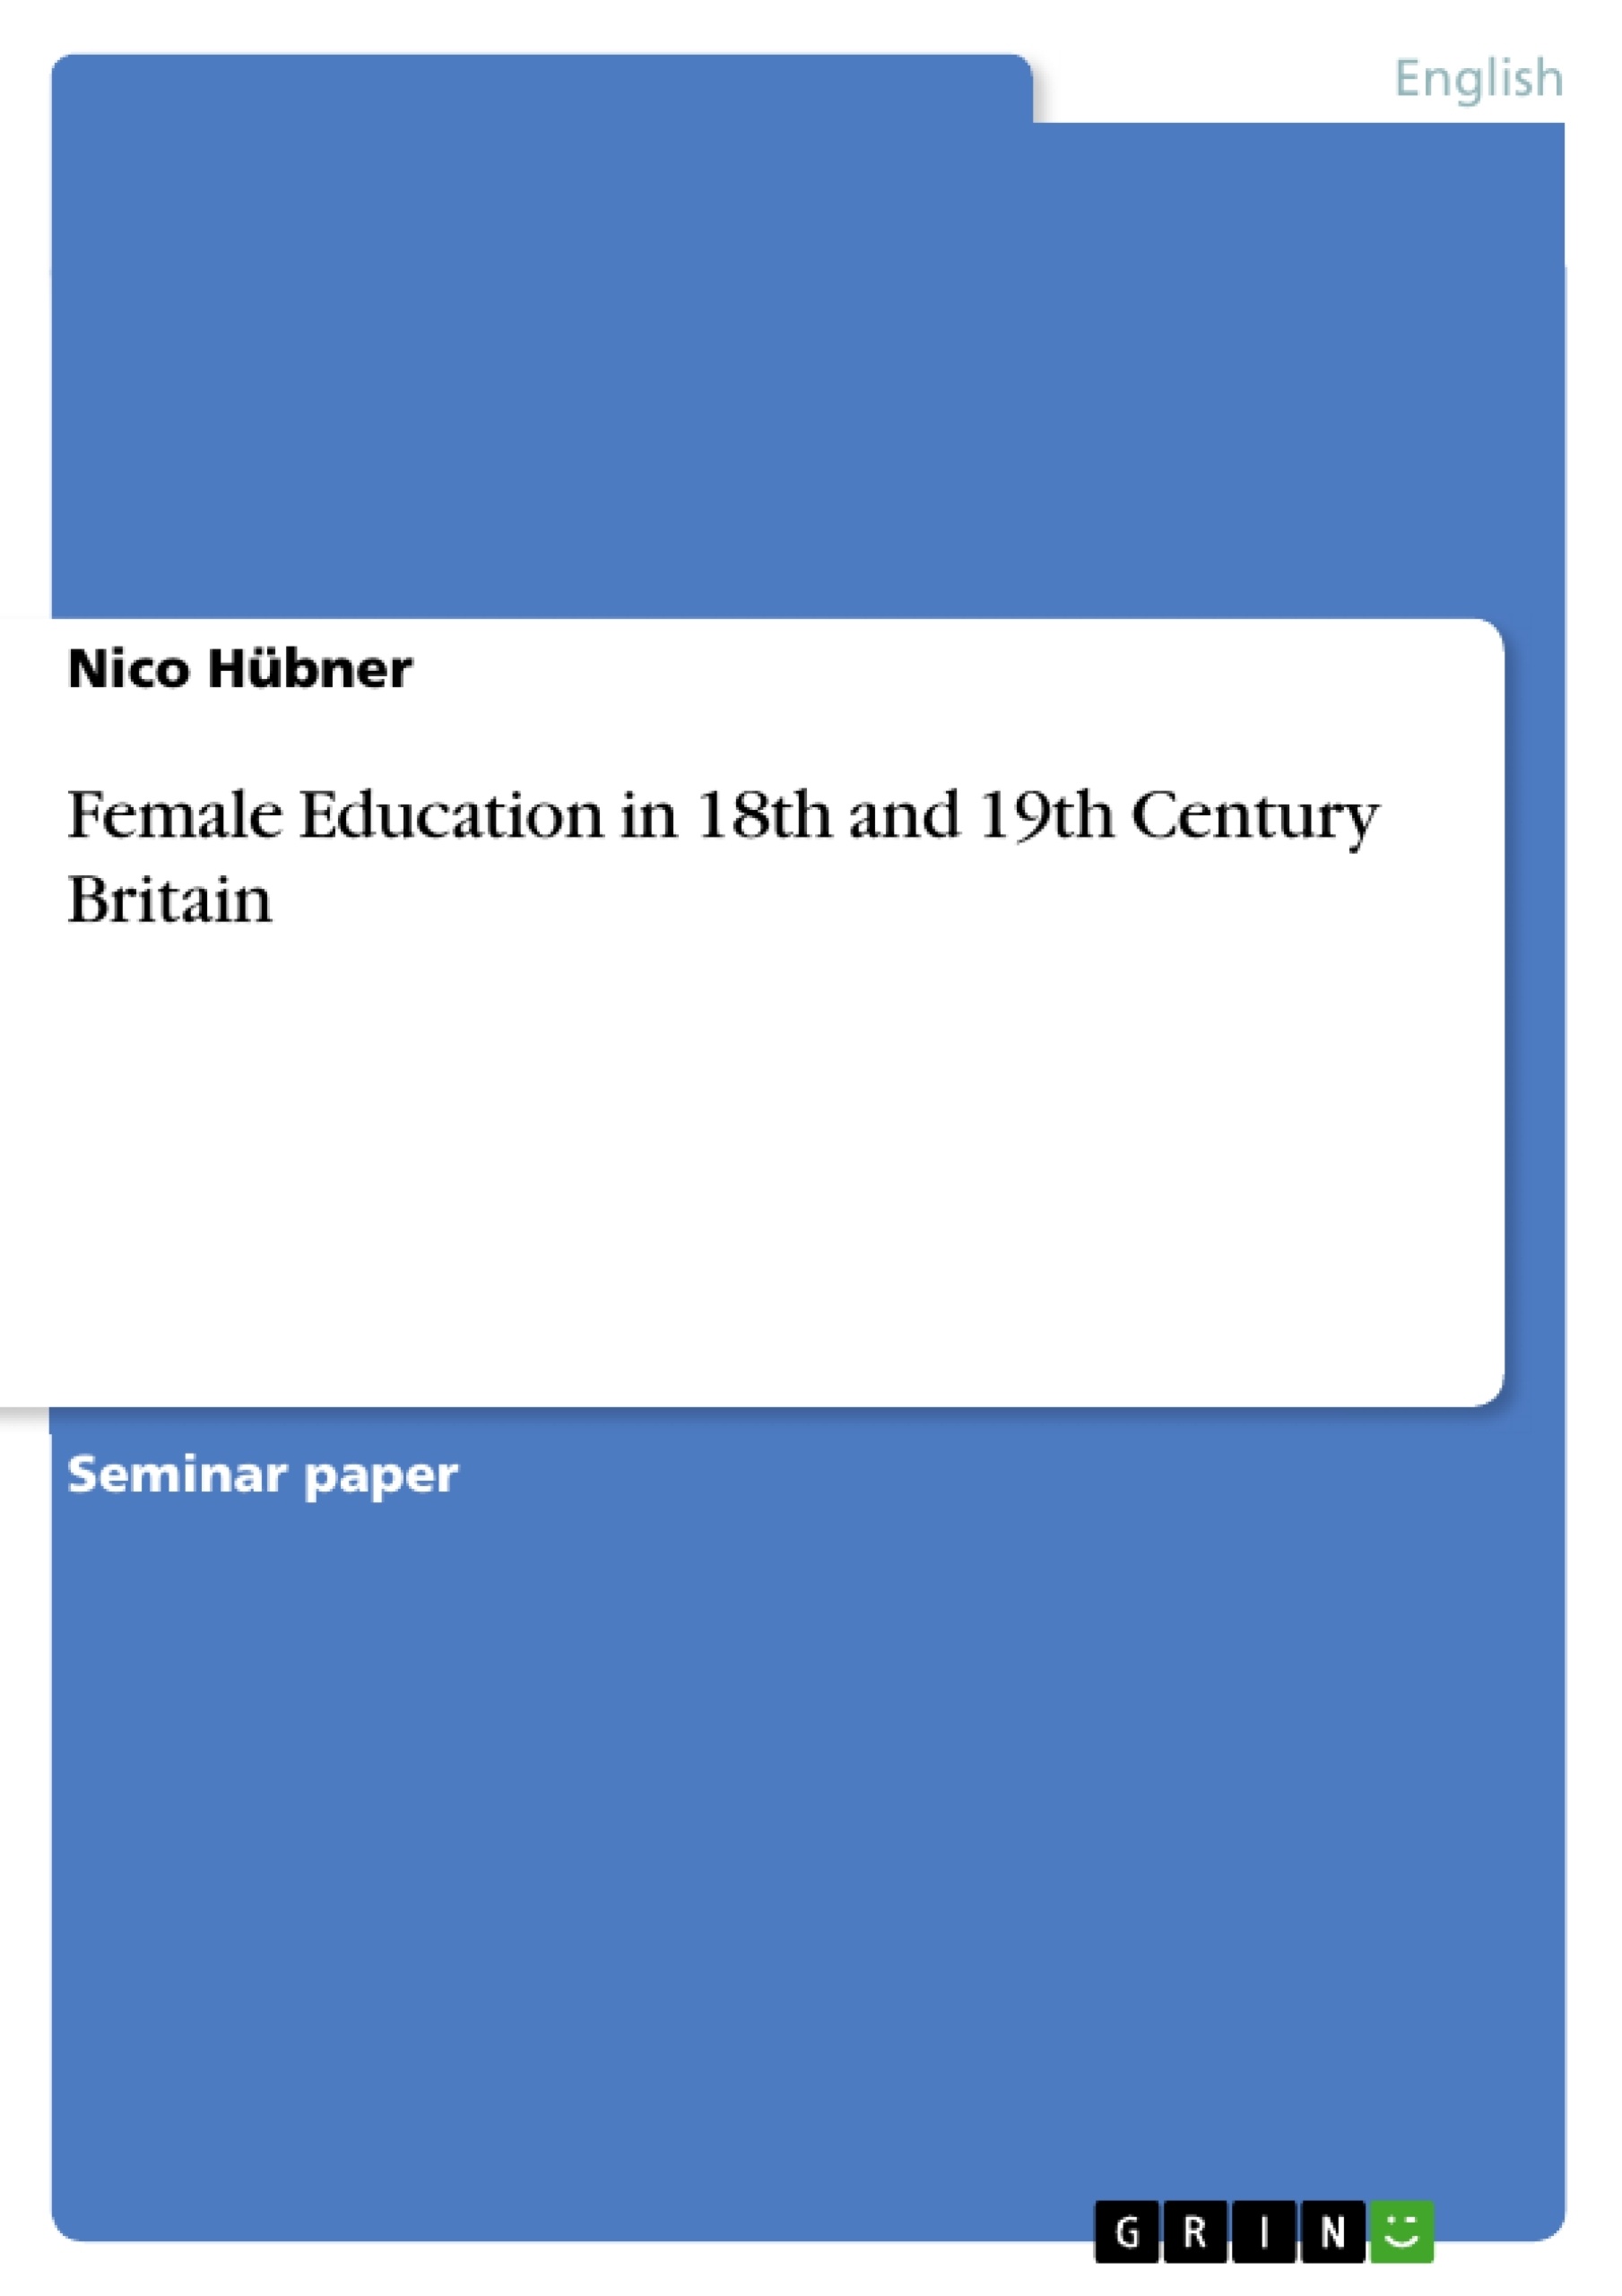 Titel: Female Education in 18th and 19th Century Britain